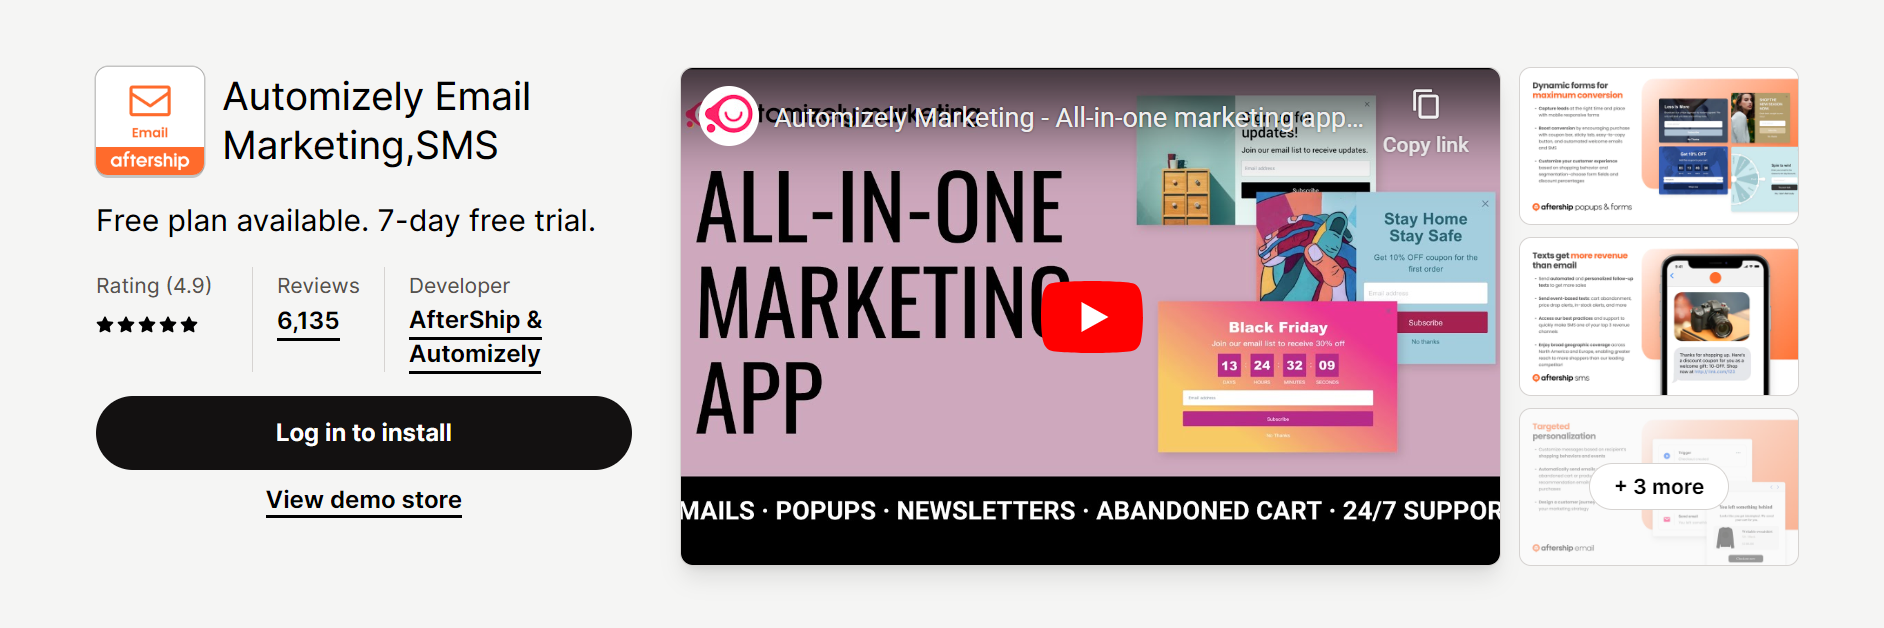 Automizely Email Marketing, SMS